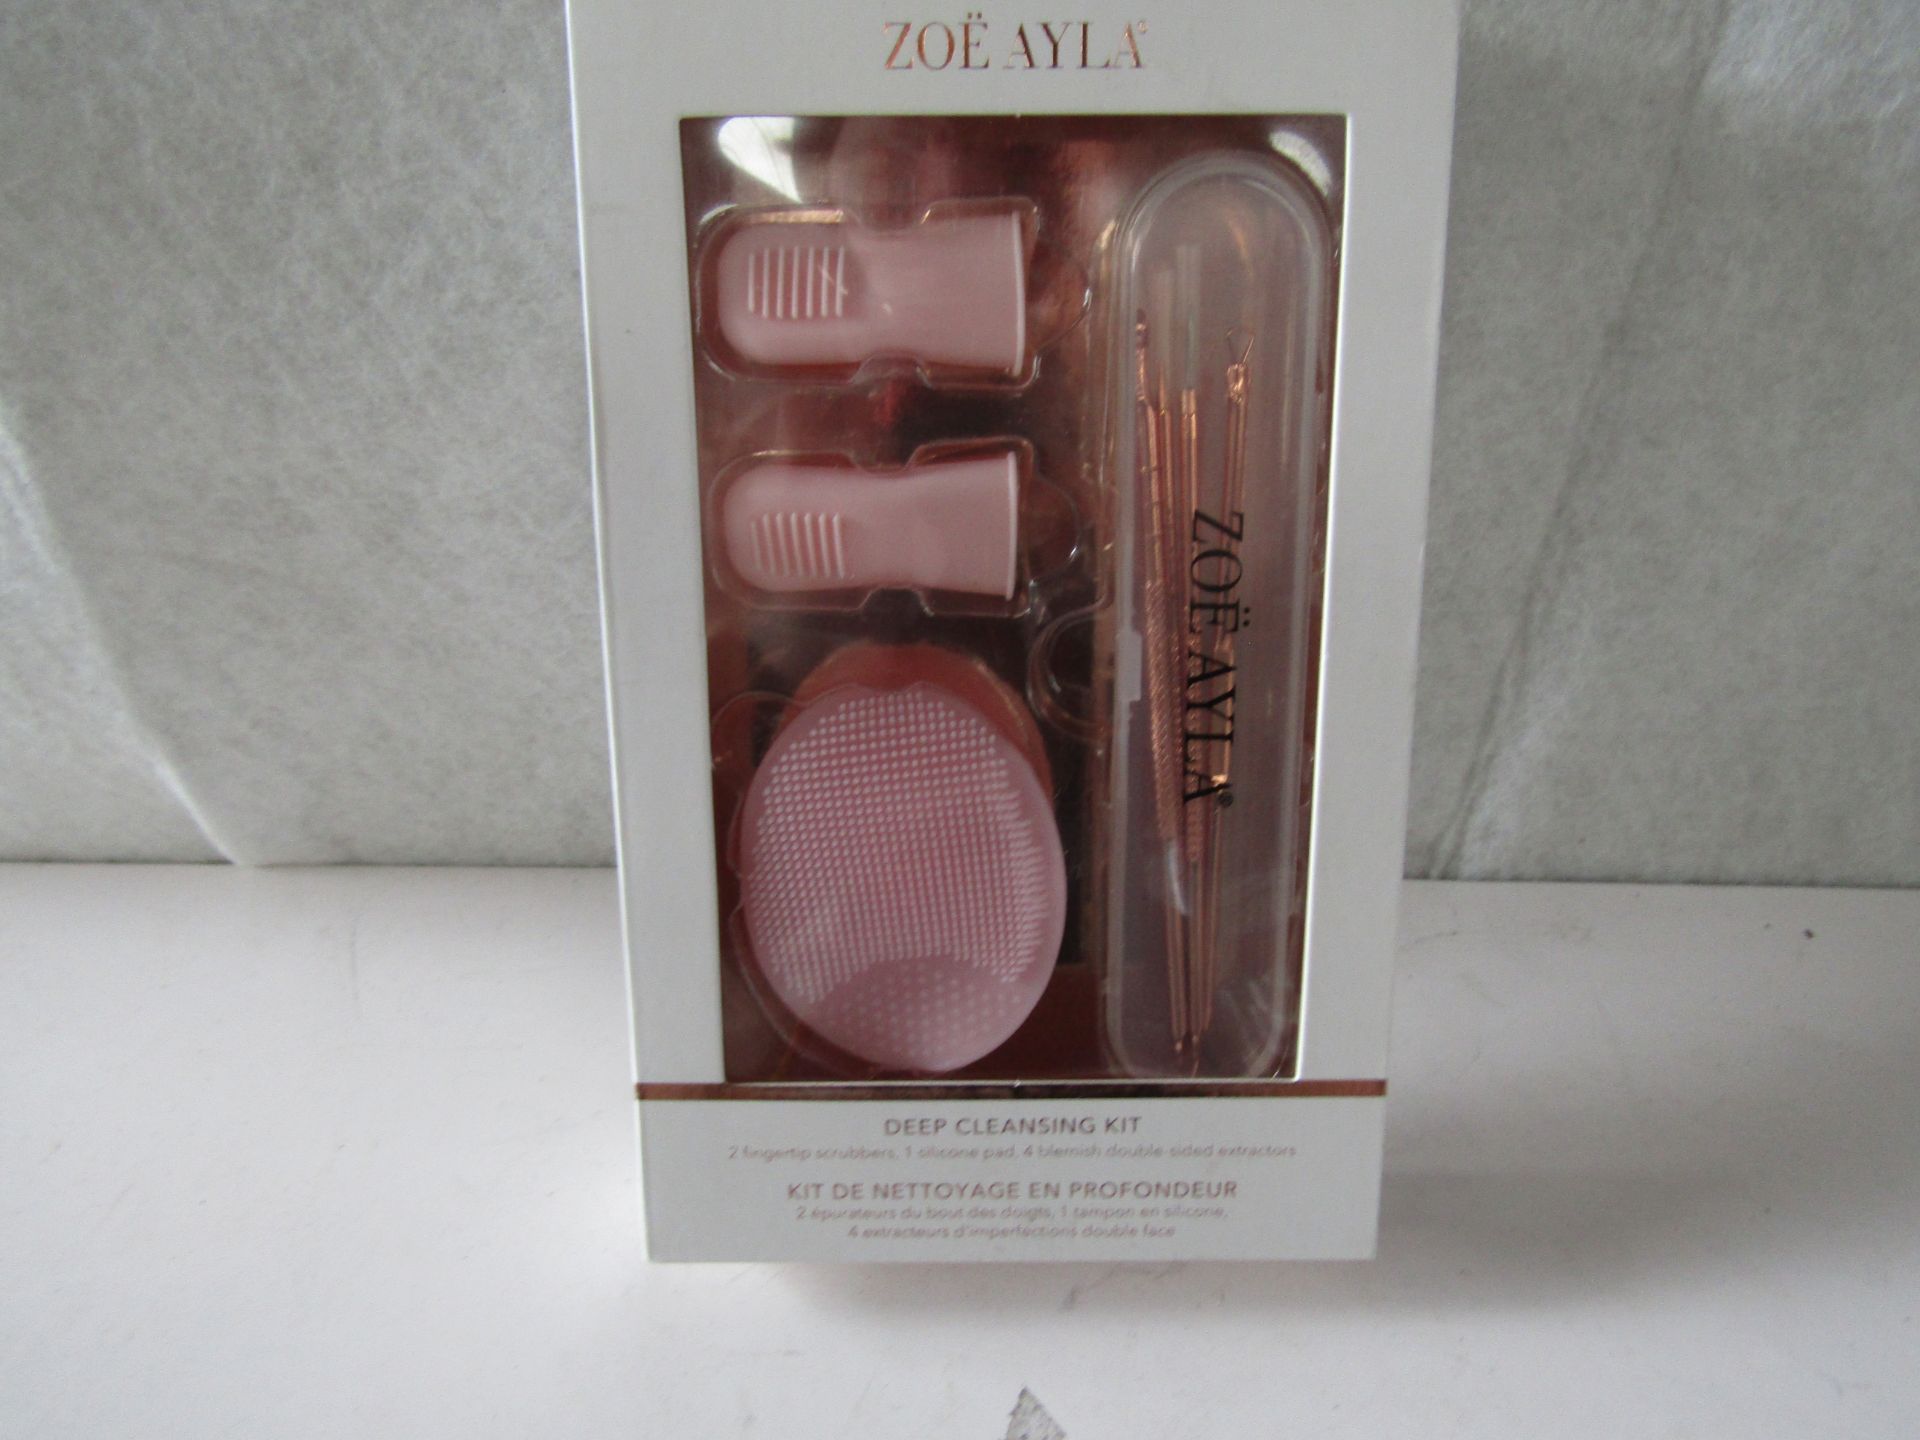 Zoe Ayla - Deep Cleansing Kit - Boxed.